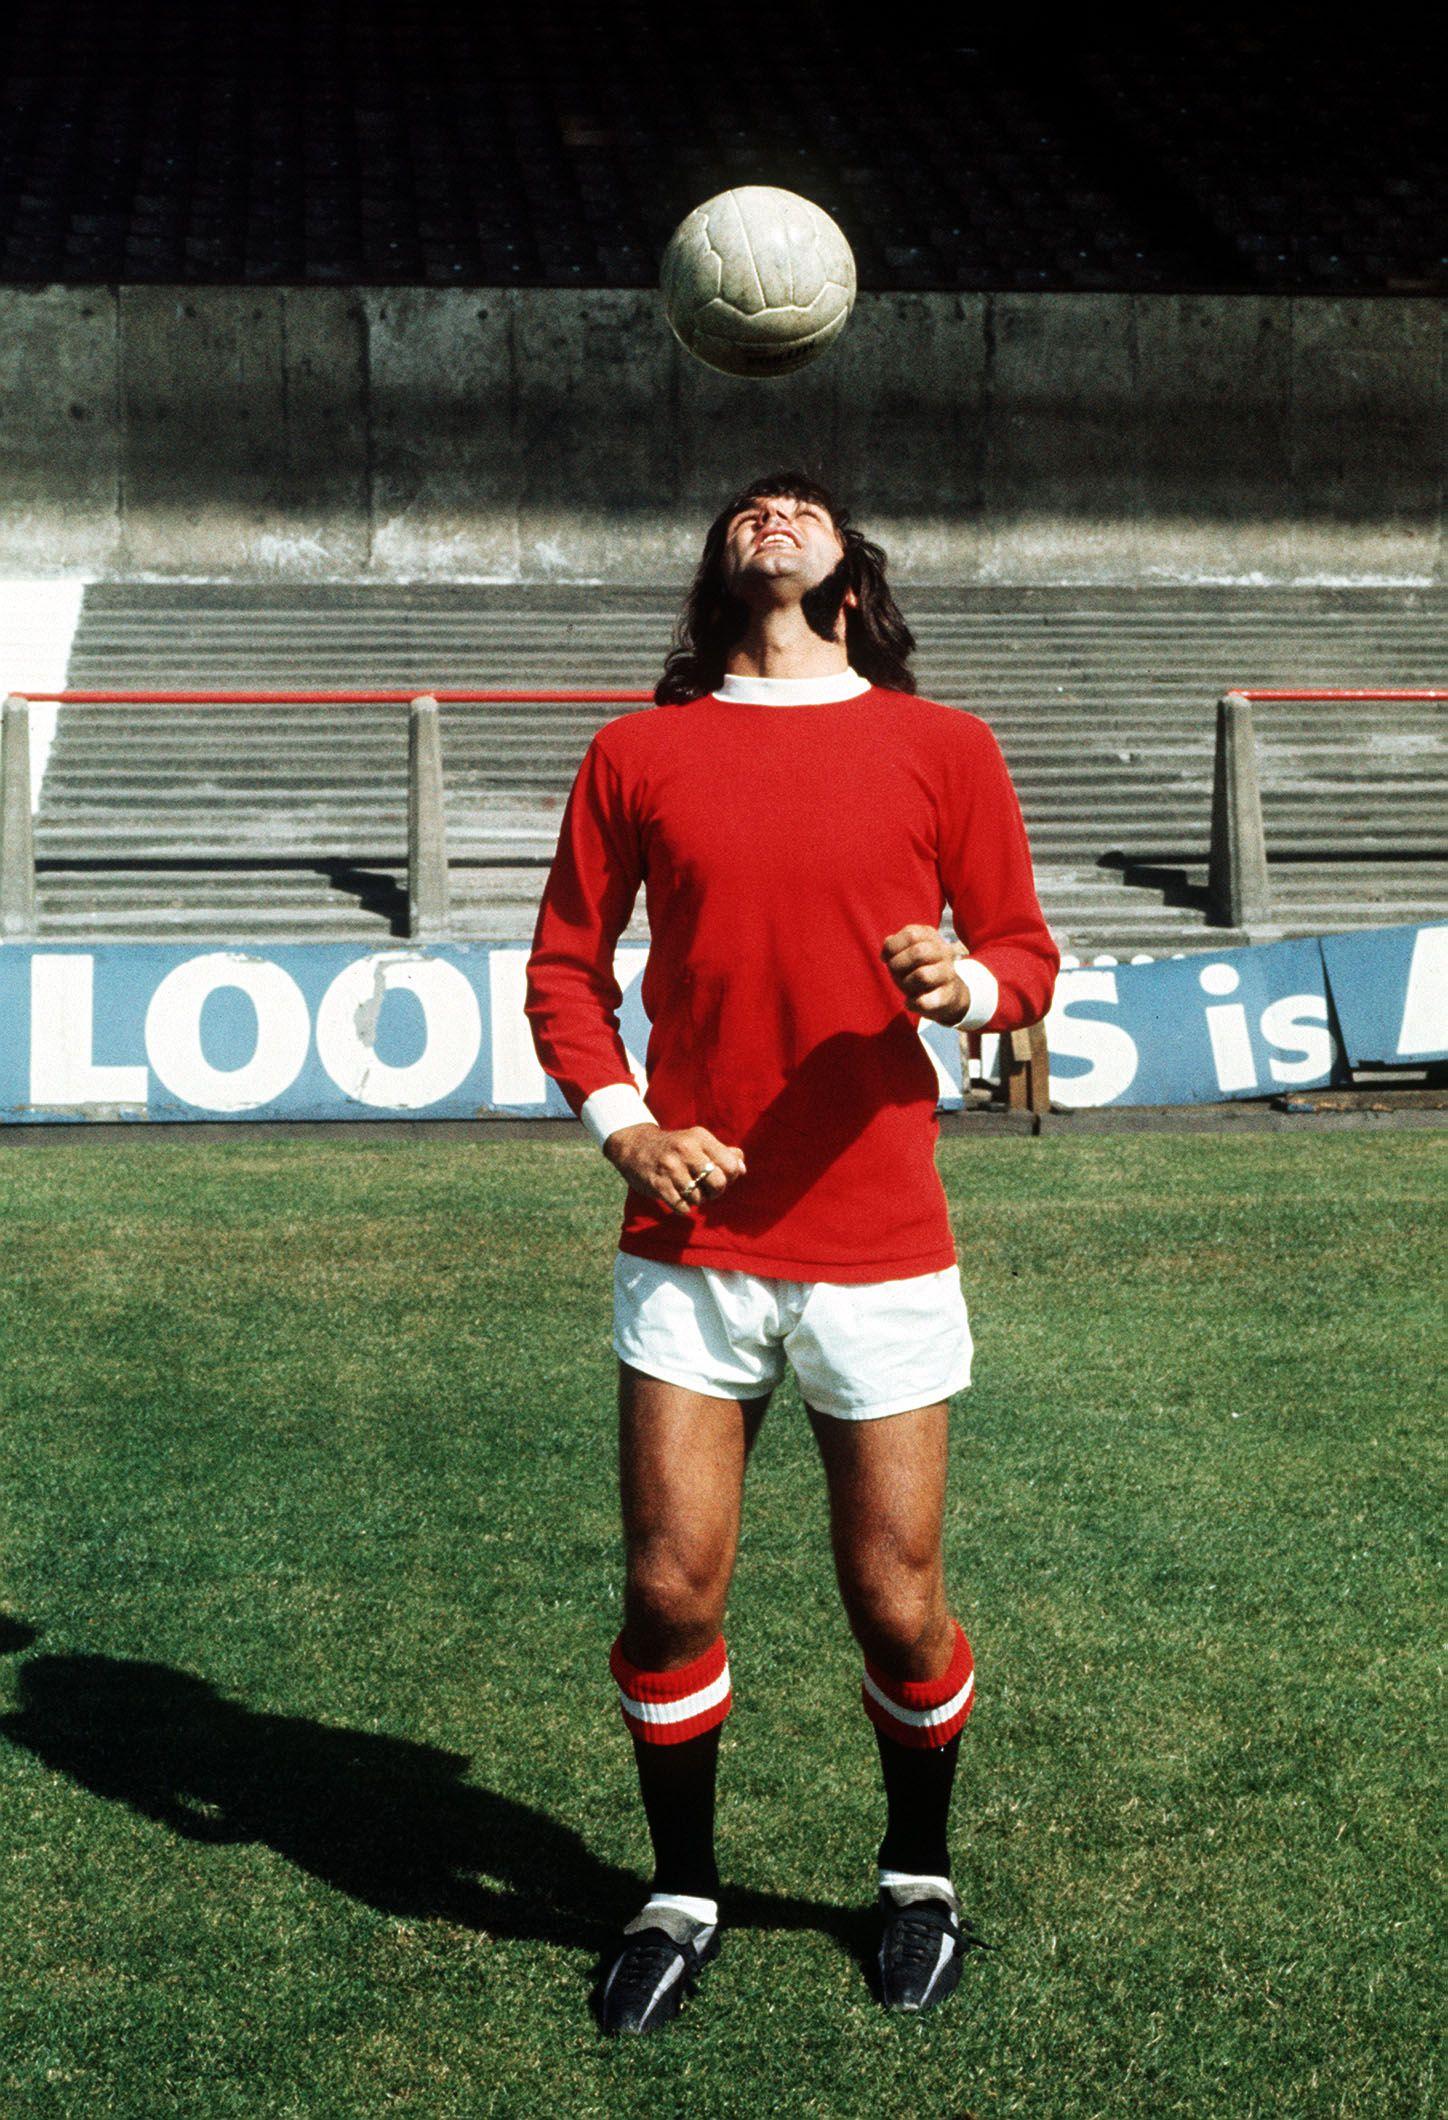 Excellent Photo Of George Best In His Über Cool Pomp. Who Ate